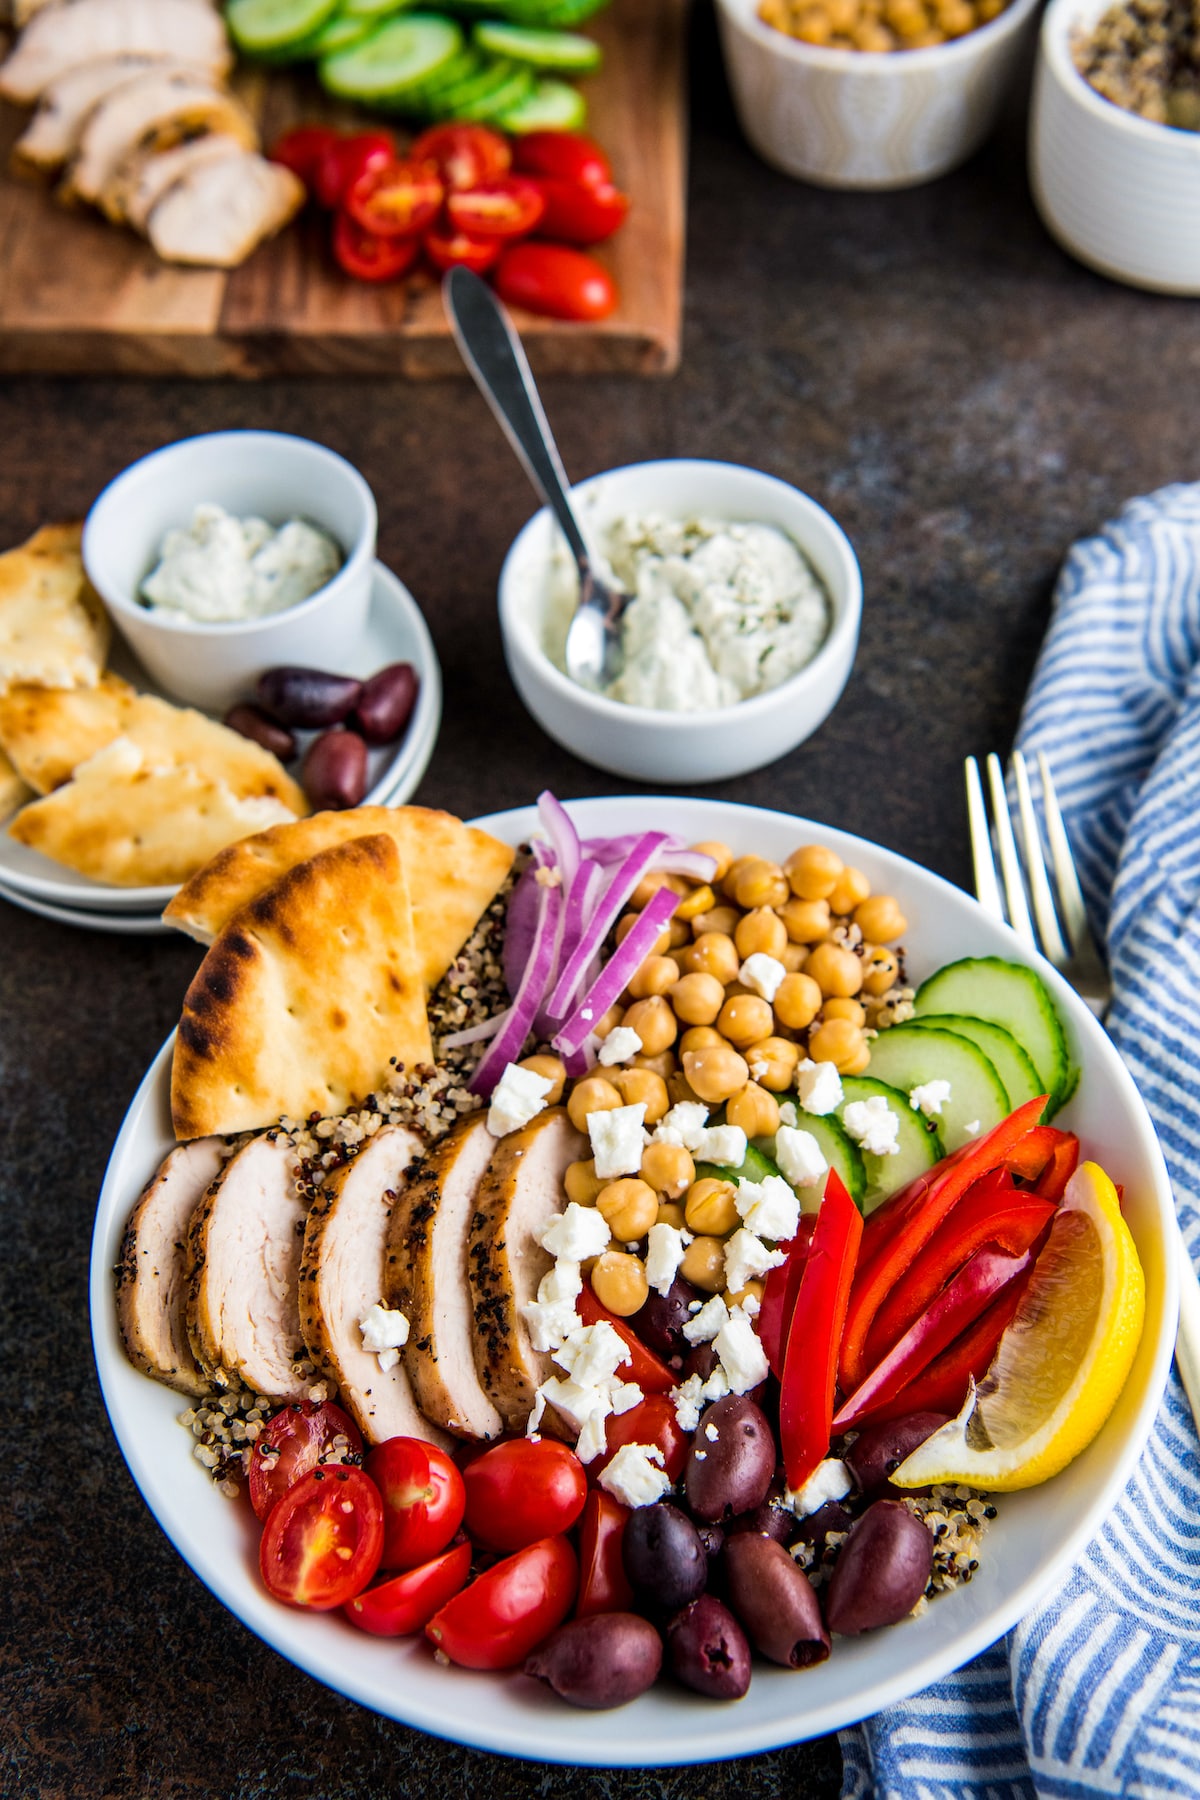 A Mediterranean Quinoa Salad in a white bowl with sides of pita and tzatziki sauce.